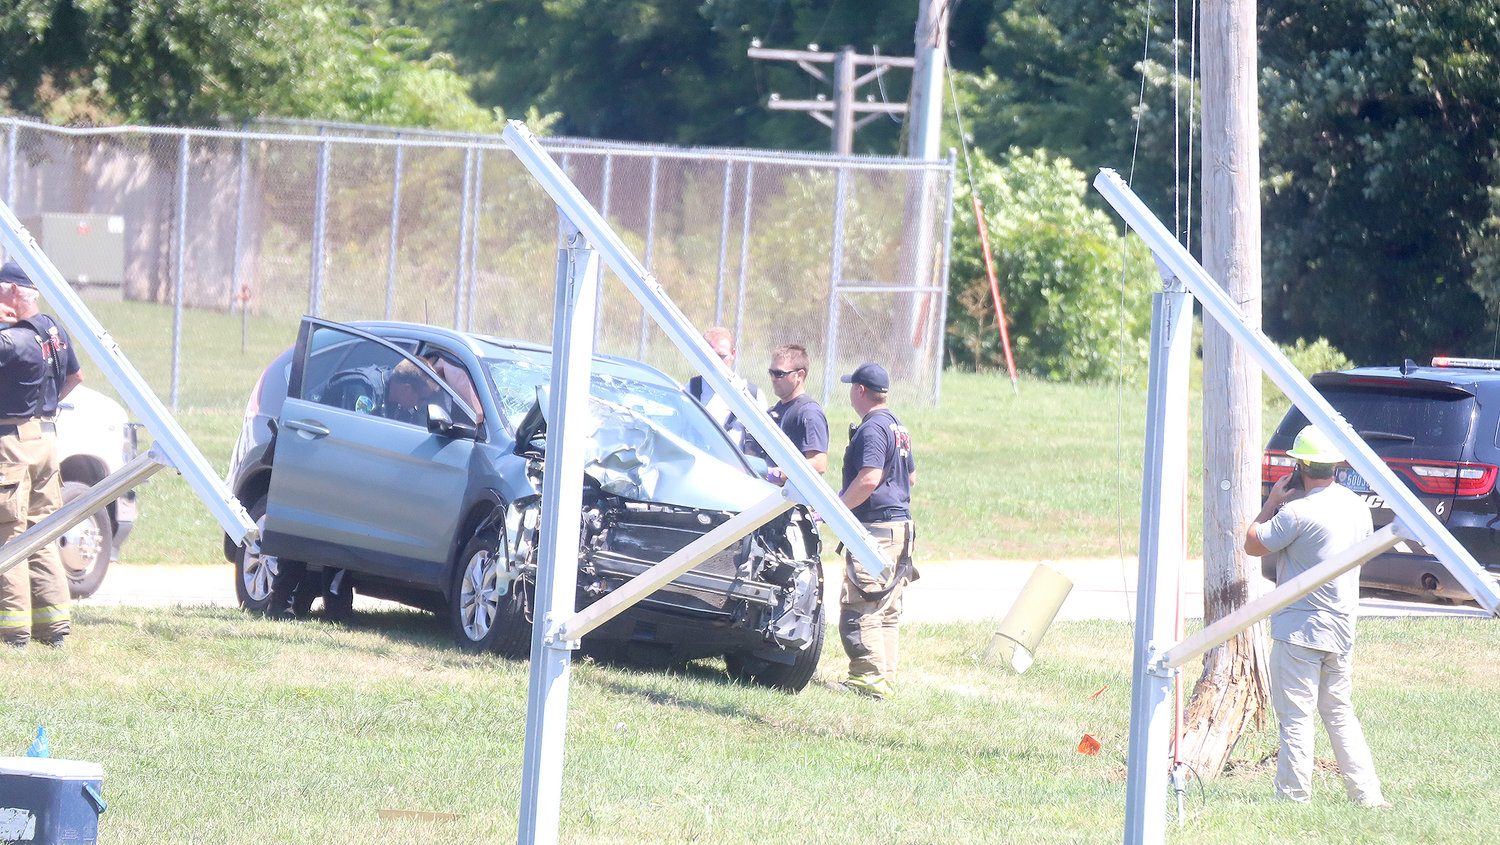 First responders work at the scene of a one-vehicle accident near Willow Patch Access just off Country Club Lane Tuesday morning. The vehicle shown struck the utility pole to the right, sending one person to the hospital by ambulance.